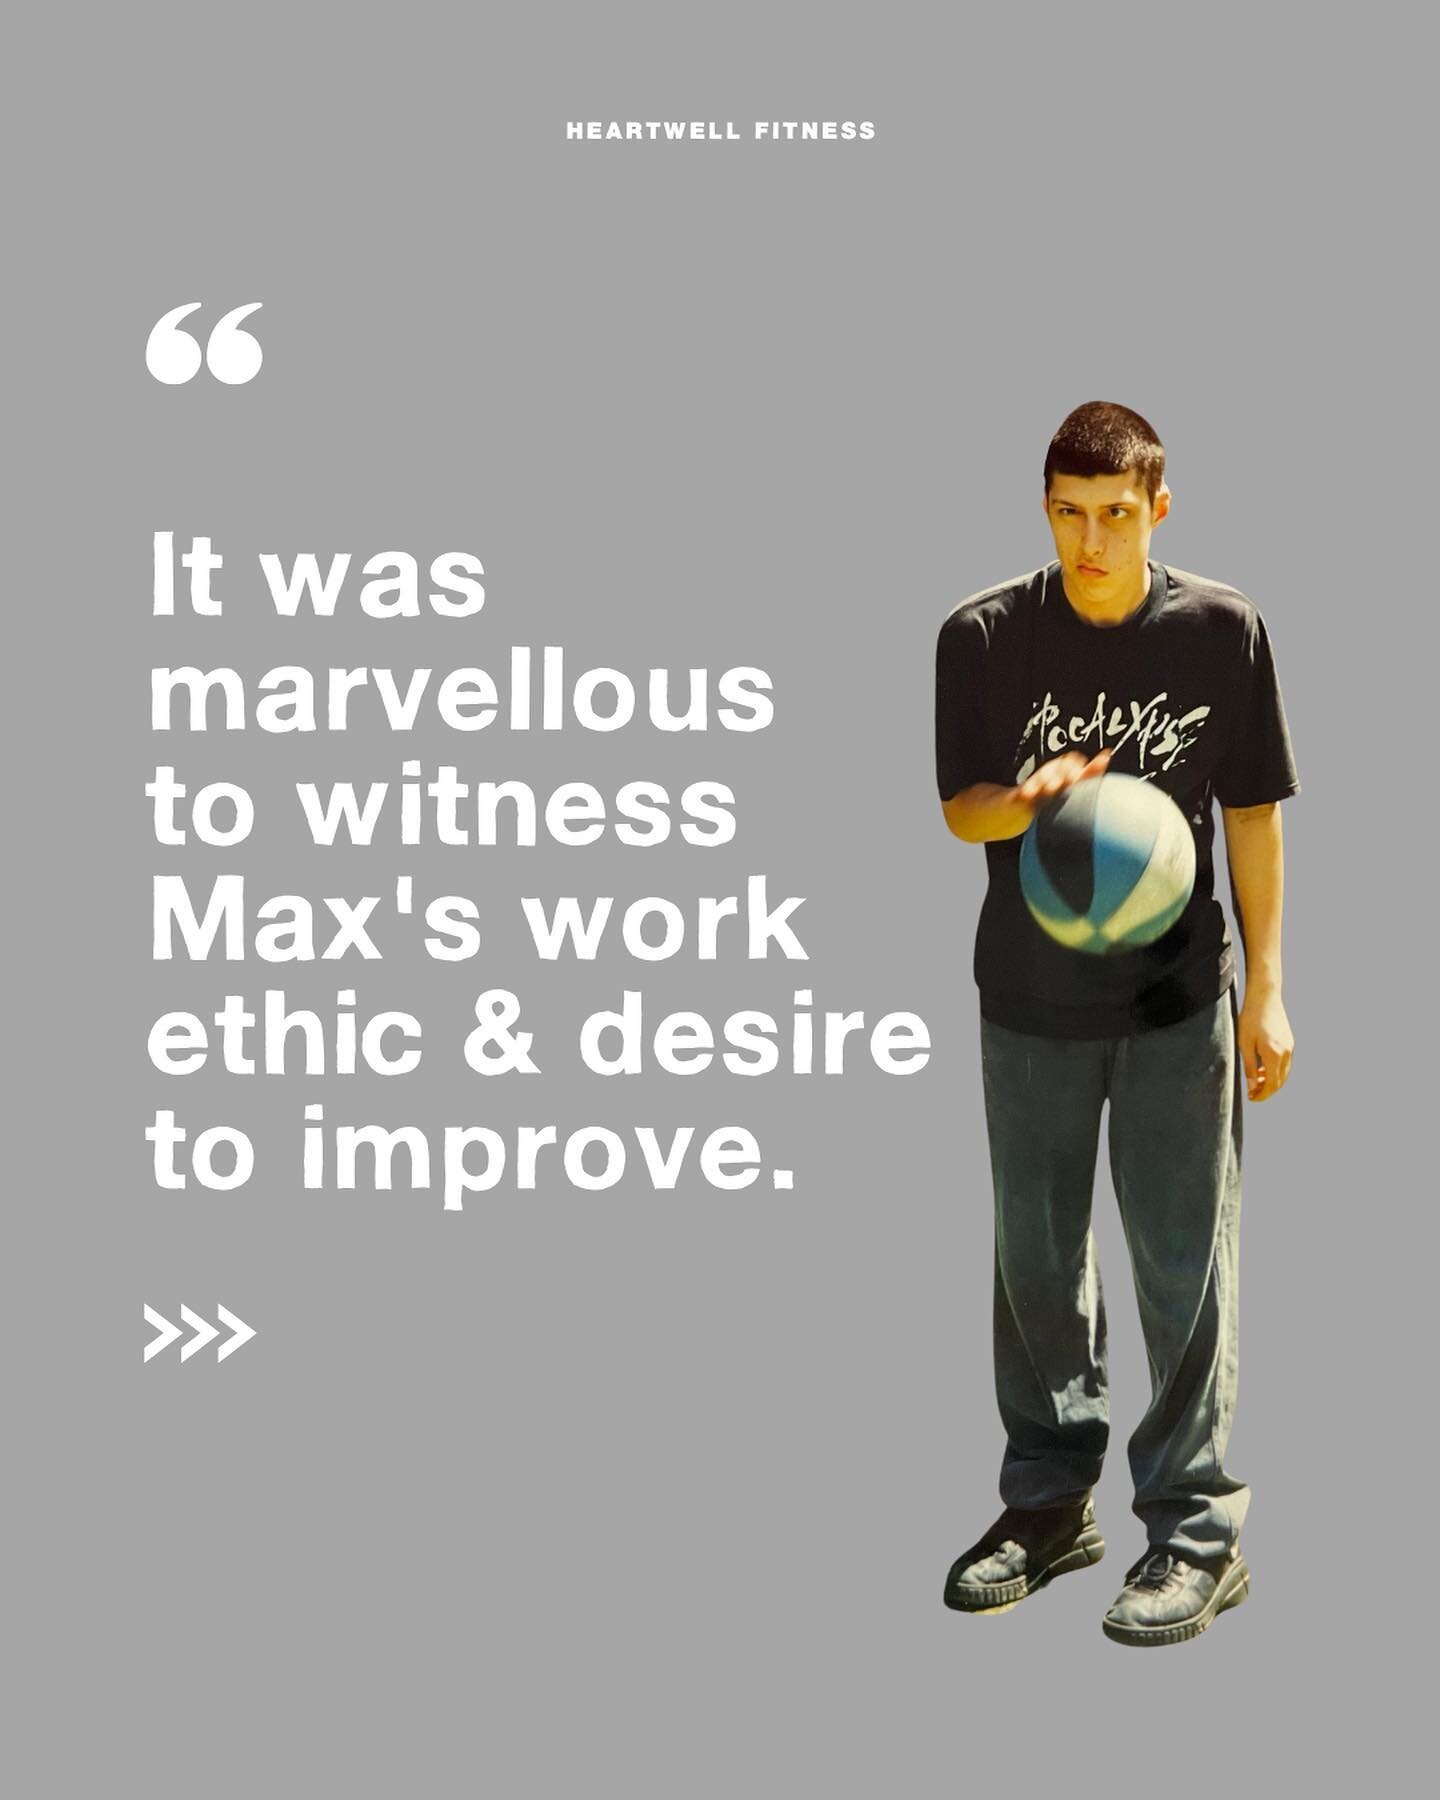 #HeartwellArchives: Co-Director Scott Taylor describing the vivacious Max, 2008.

Slide one
In white text over grey background:
&ldquo;It was marvellous to witness Max's work ethic and desire to improve.&rdquo;

Slide two
In white text over red and g